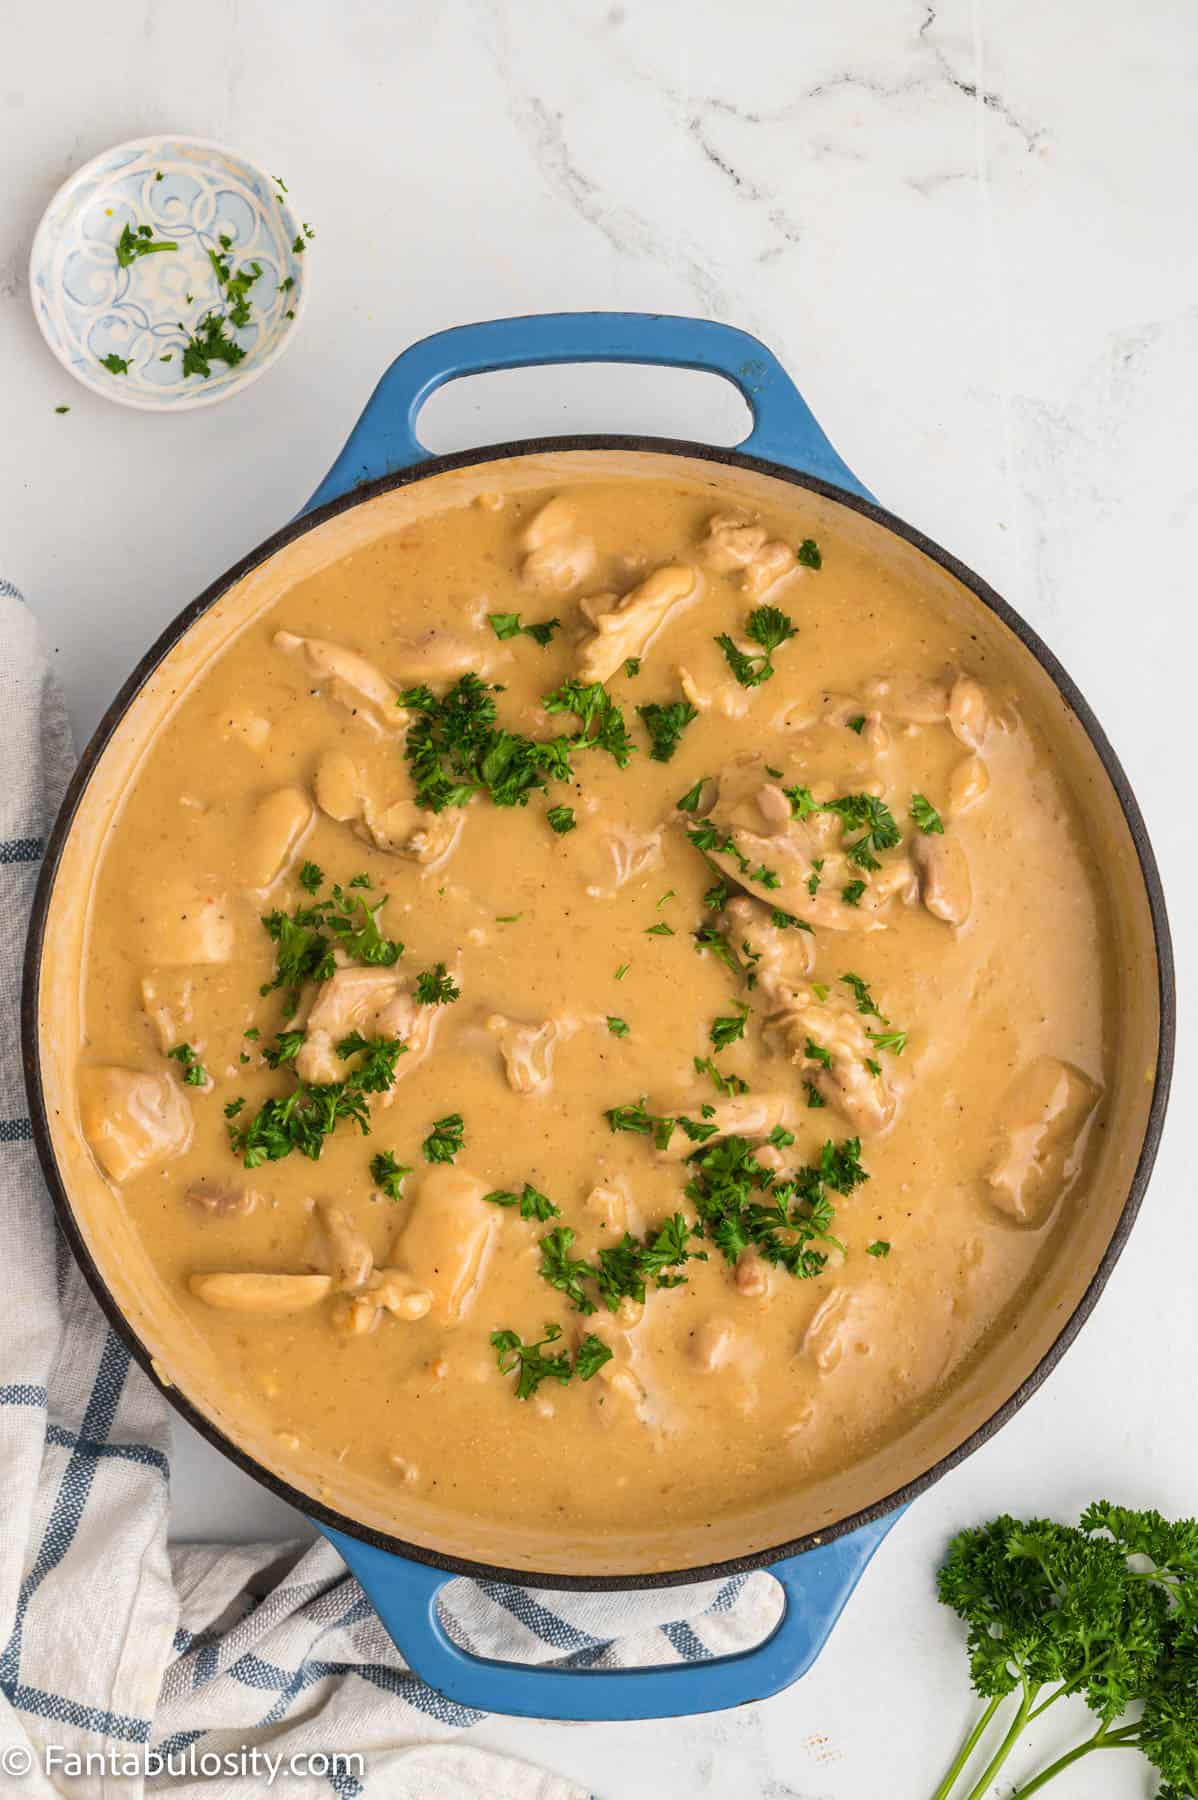 Vibrant green fresh parsley has been sprinkled over a large pan of creamy chicken and gravy